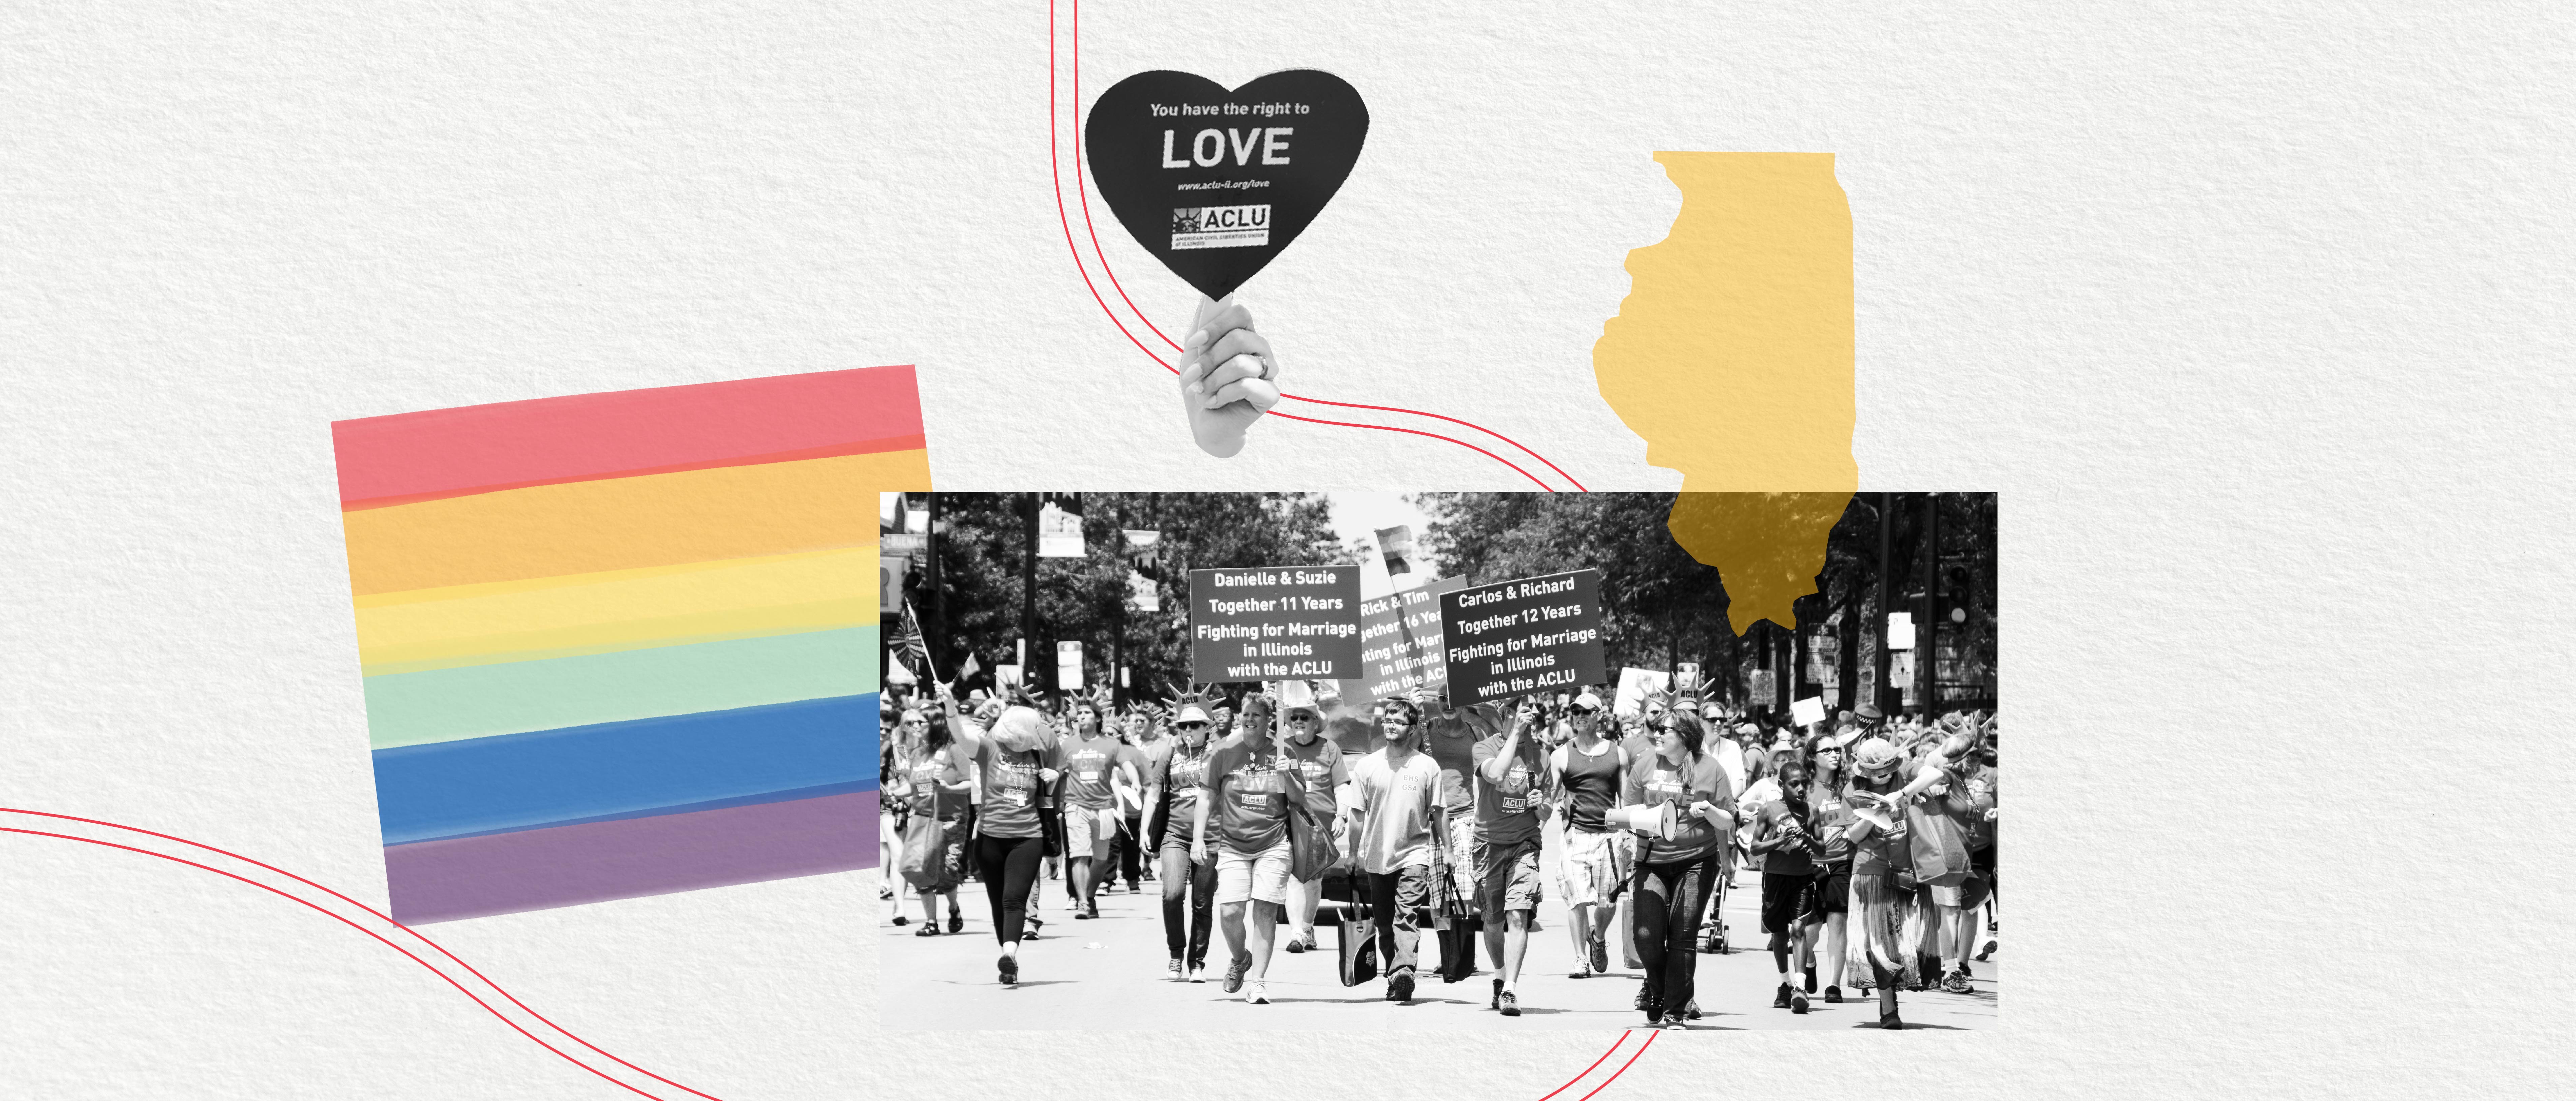 Off white background. Pride flag on the left. Photo of couples marching. Yellow Illinois above and hand holding a "love is love" sign. 